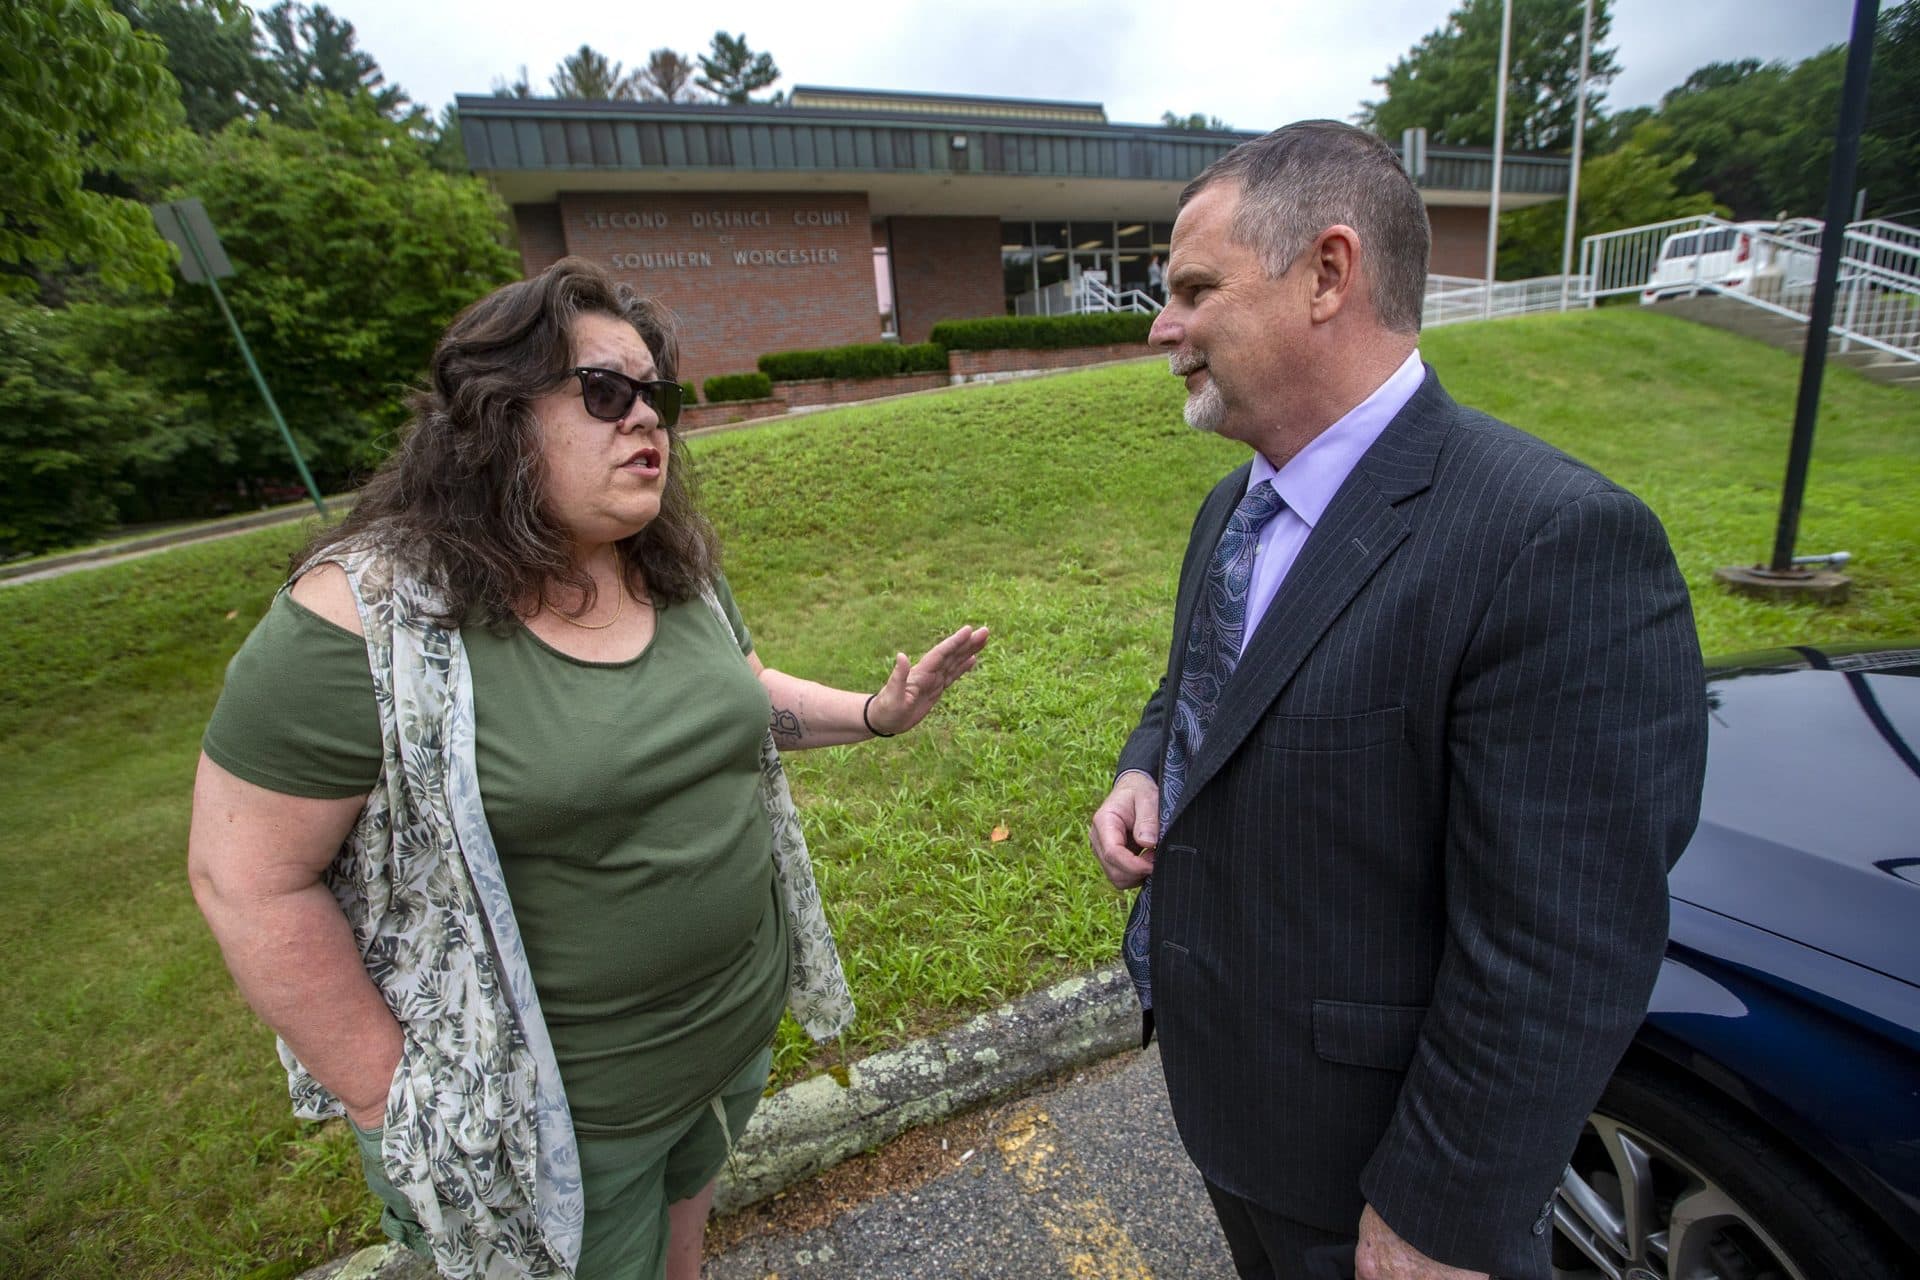 Laura Wojcechowicz speaking with her attorney Joseph Hennessey outside of the Second District Courthouse of Southern Worcester County in Uxbridge. (Jesse Costa/WBUR)